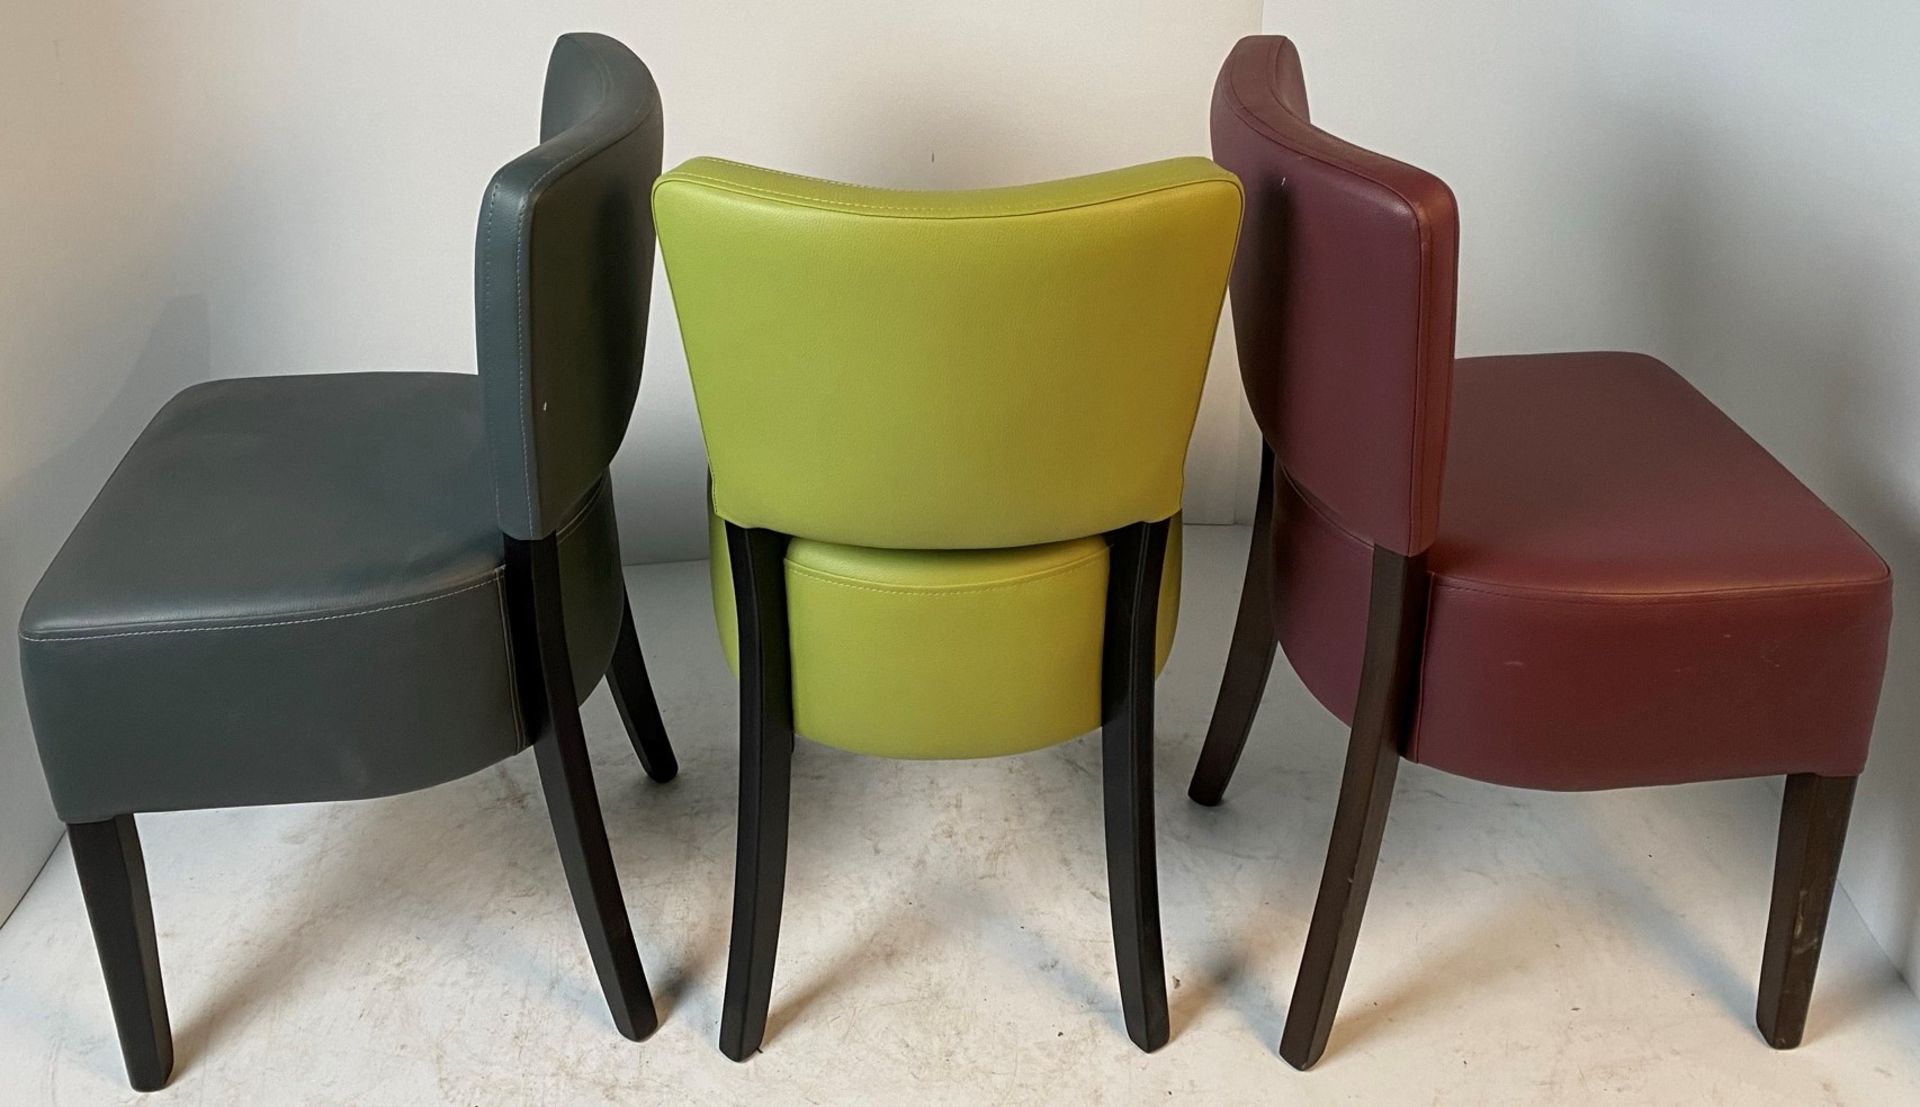 3 x assorted Memphis side/dining chairs - Vena SA4, - Image 2 of 2